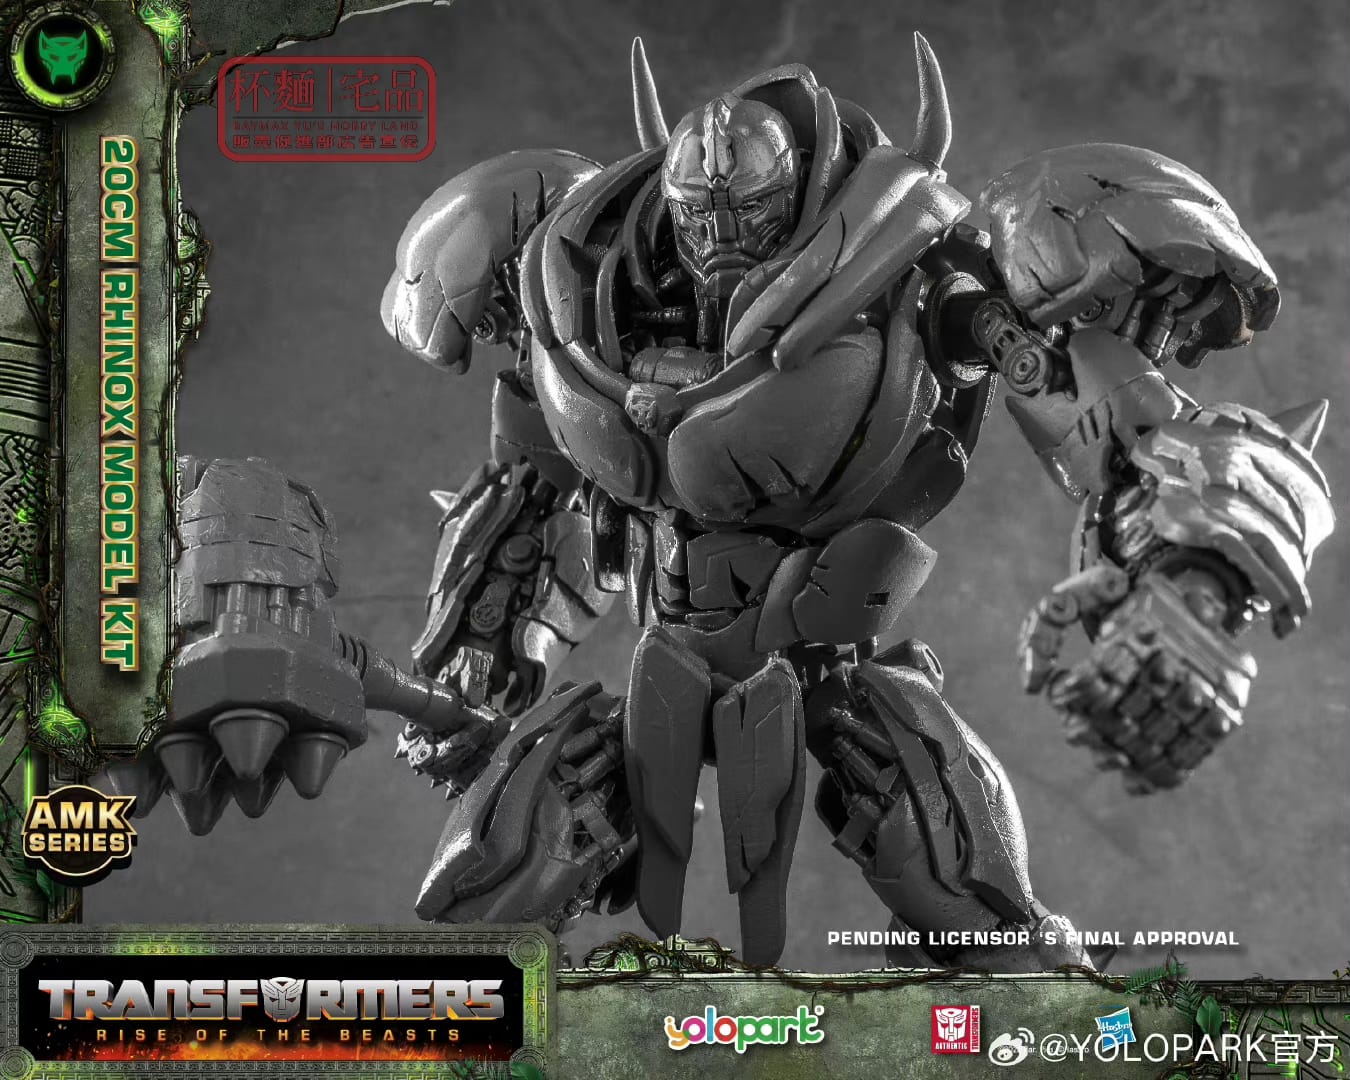 Yolopart Kits Rise of the Beasts Wave 2 - Scourge, Cheetor, and Rhinox -  Transformers